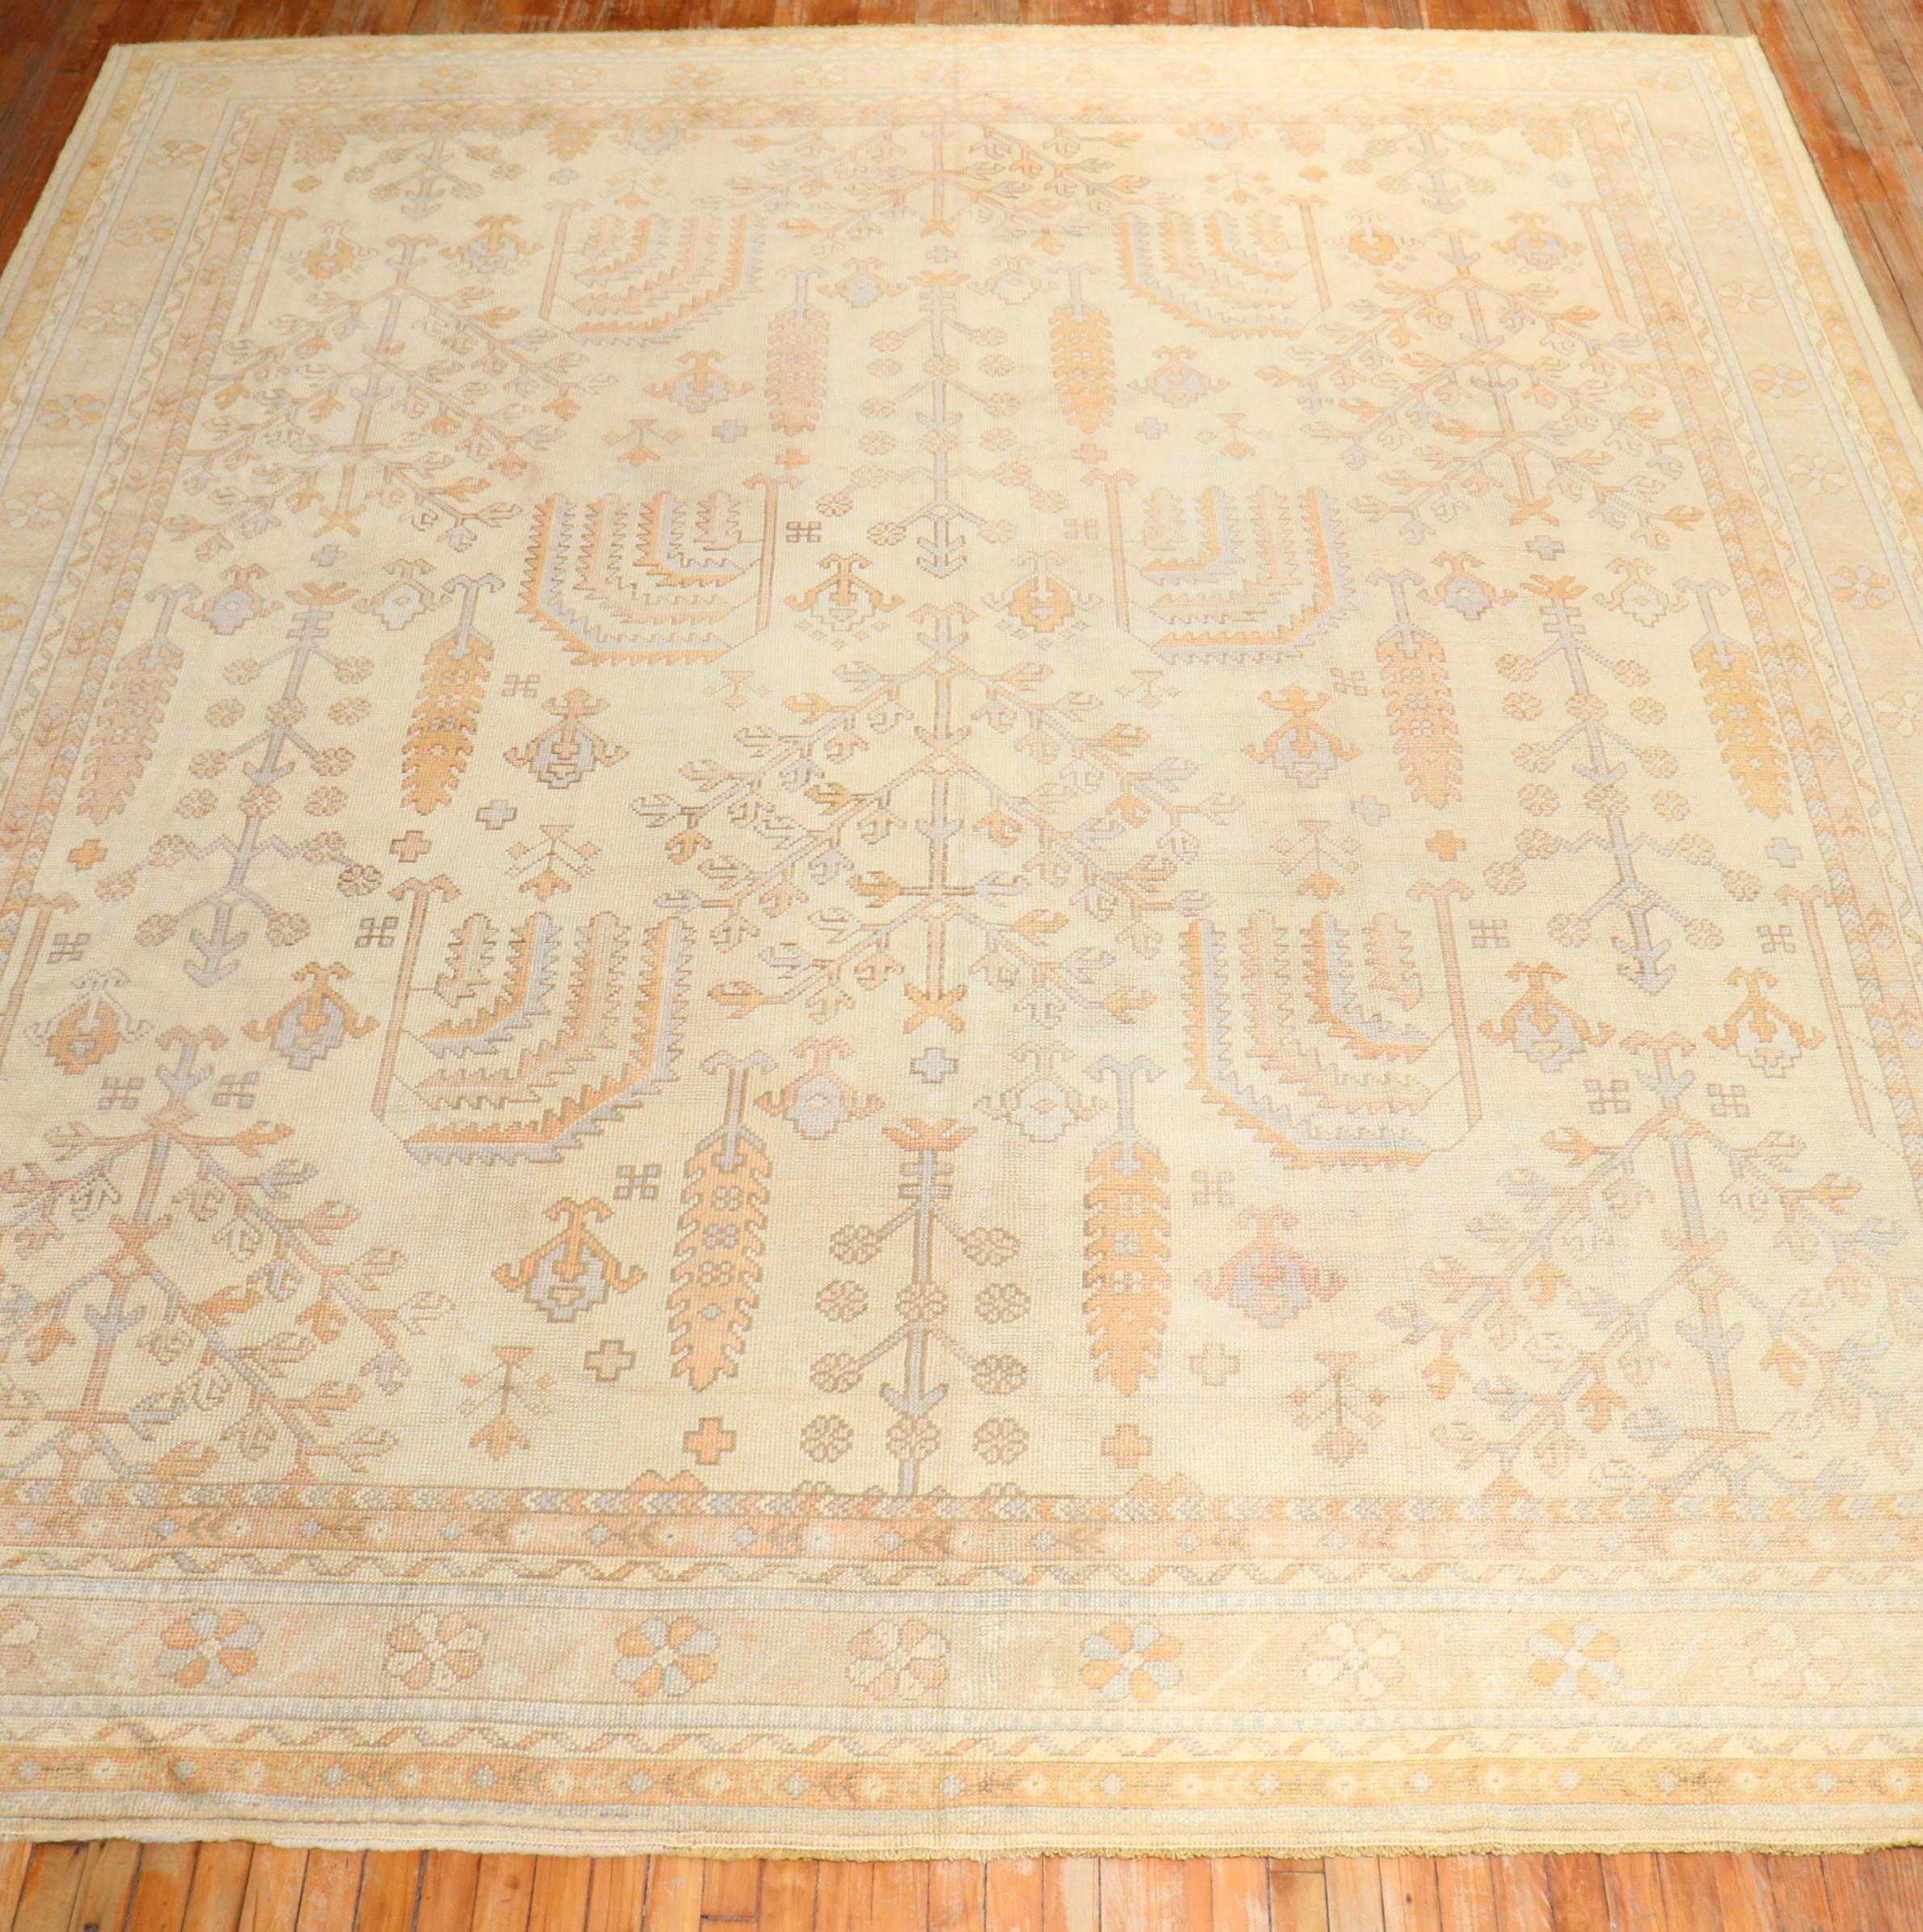 An early 20th-century square room size Turkish Oushak rug with a willow tree motif on an ivory ground

Measures: 11'1'' x 12'8